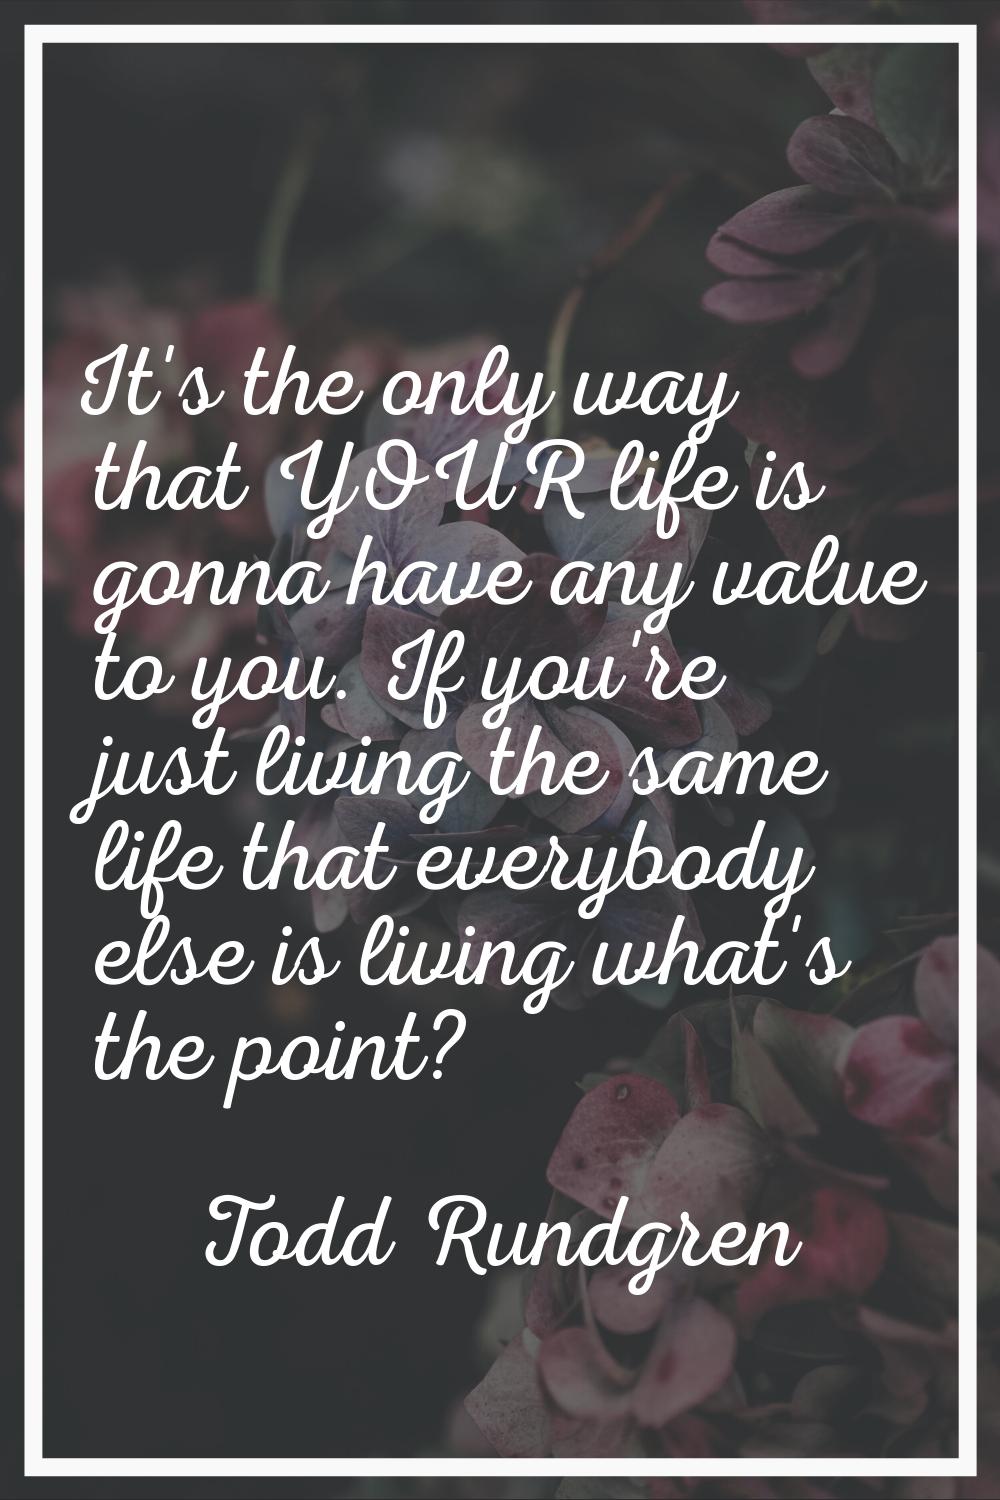 It's the only way that YOUR life is gonna have any value to you. If you're just living the same lif